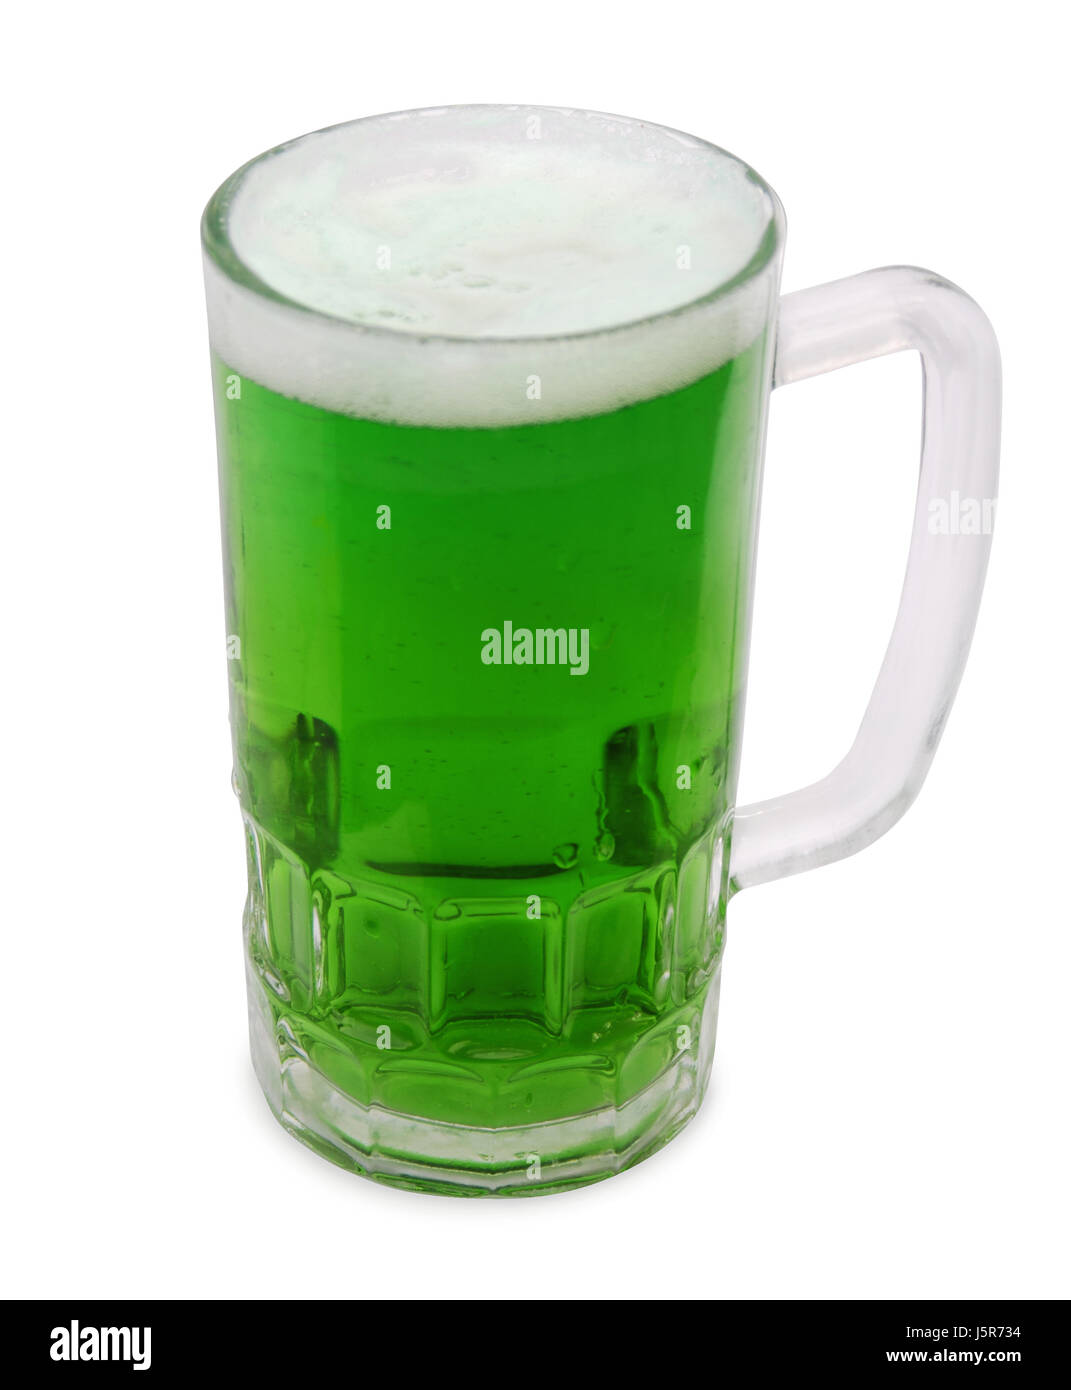 culture holiday colour green inked beer glass beer irish commemoration day Stock Photo